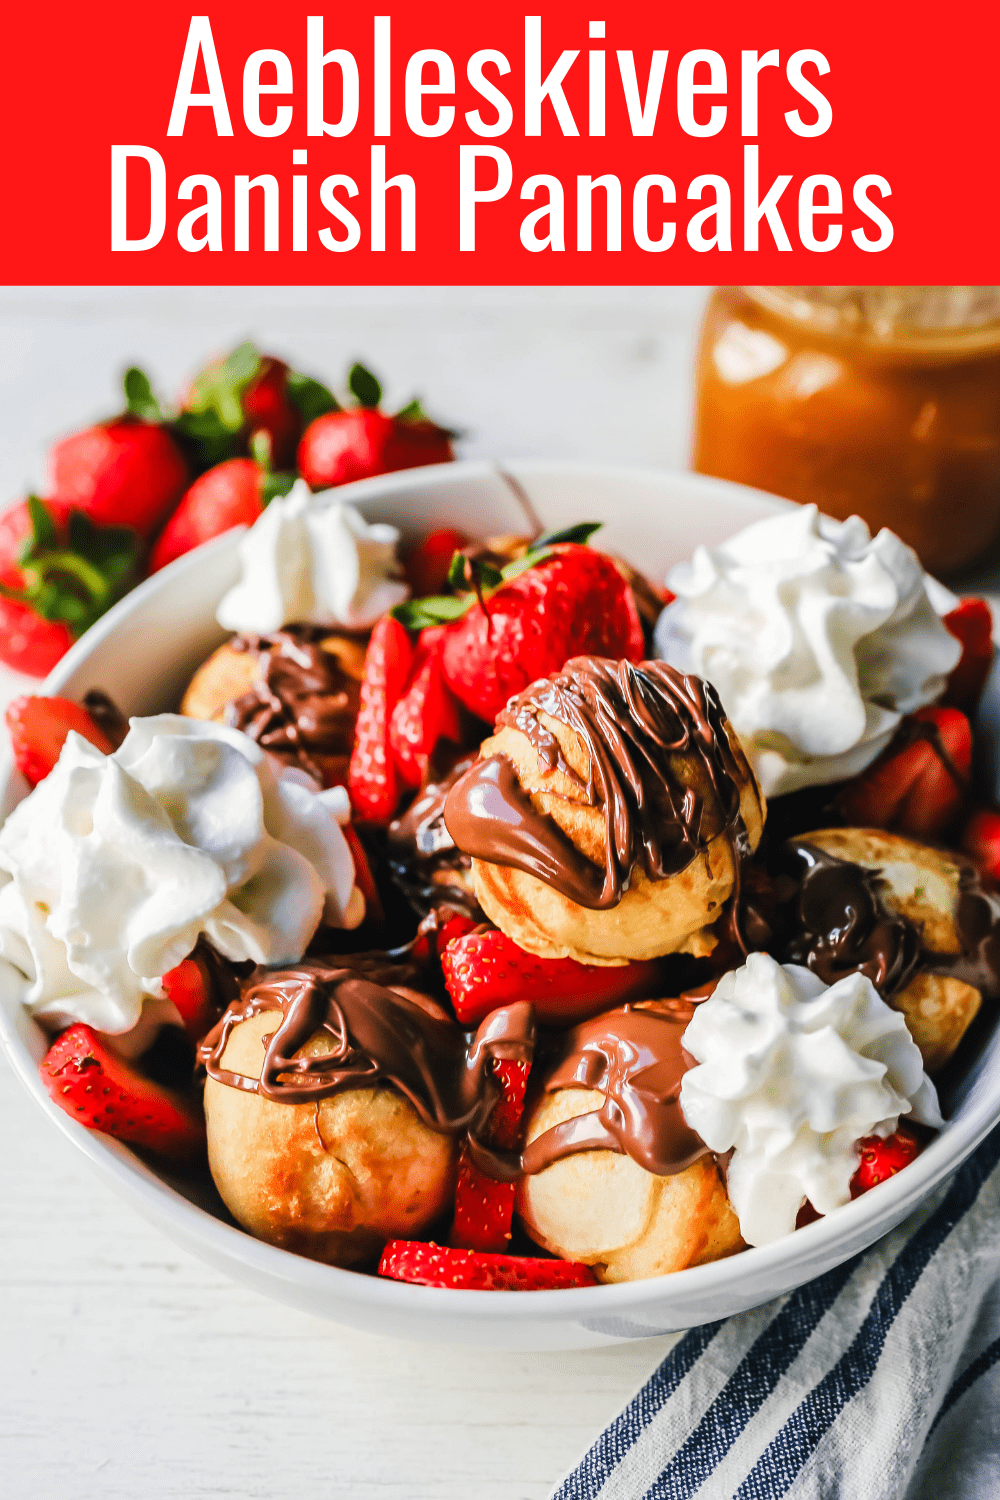 Aebleskiver Danish Pancakes a traditional Danish breakfast or dessert popular in Denmark is a circle pancake cooked in an aebleskiver pan and served with jam, powdered sugar, syrup, and fruit.  www.modernhoney.com #aebleskivers #danishpancakes #pancakes